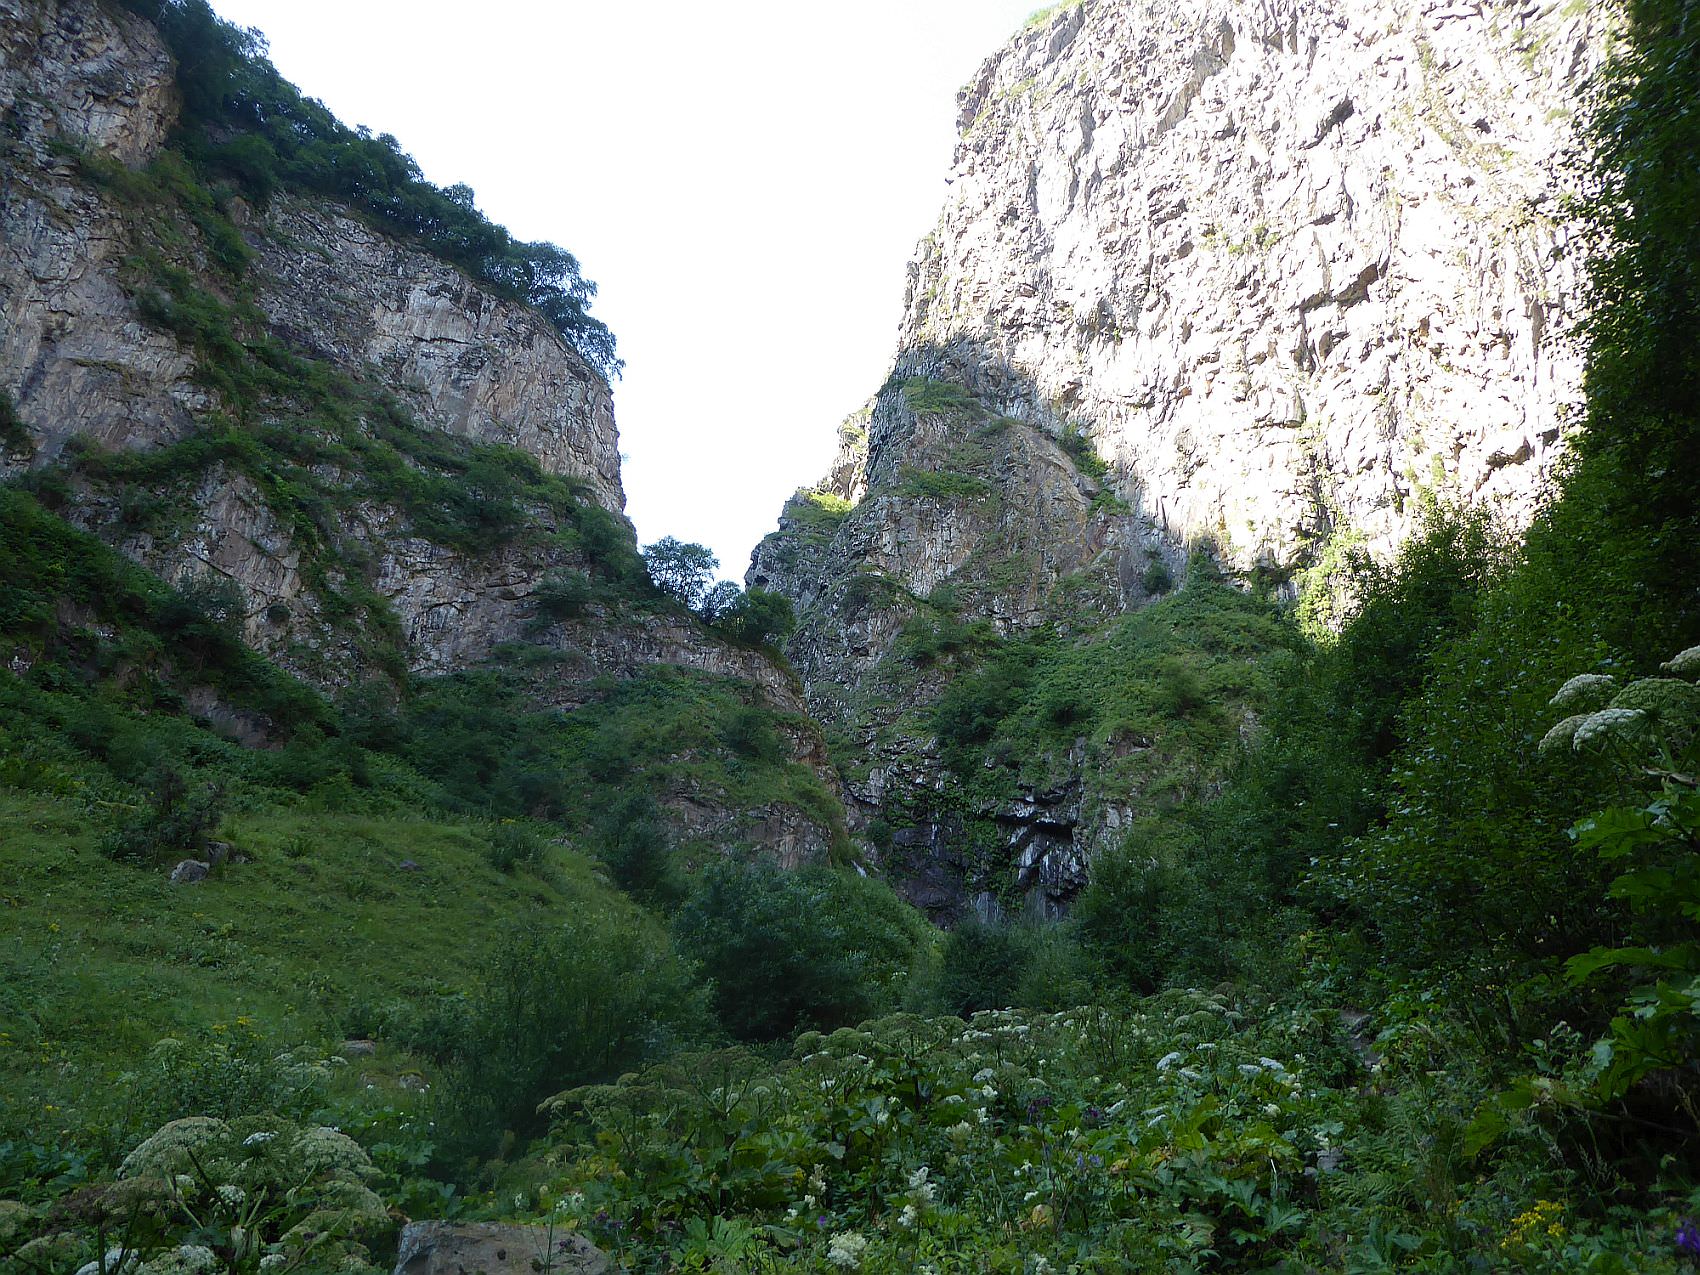 Gorge leading to the smaller waterfall